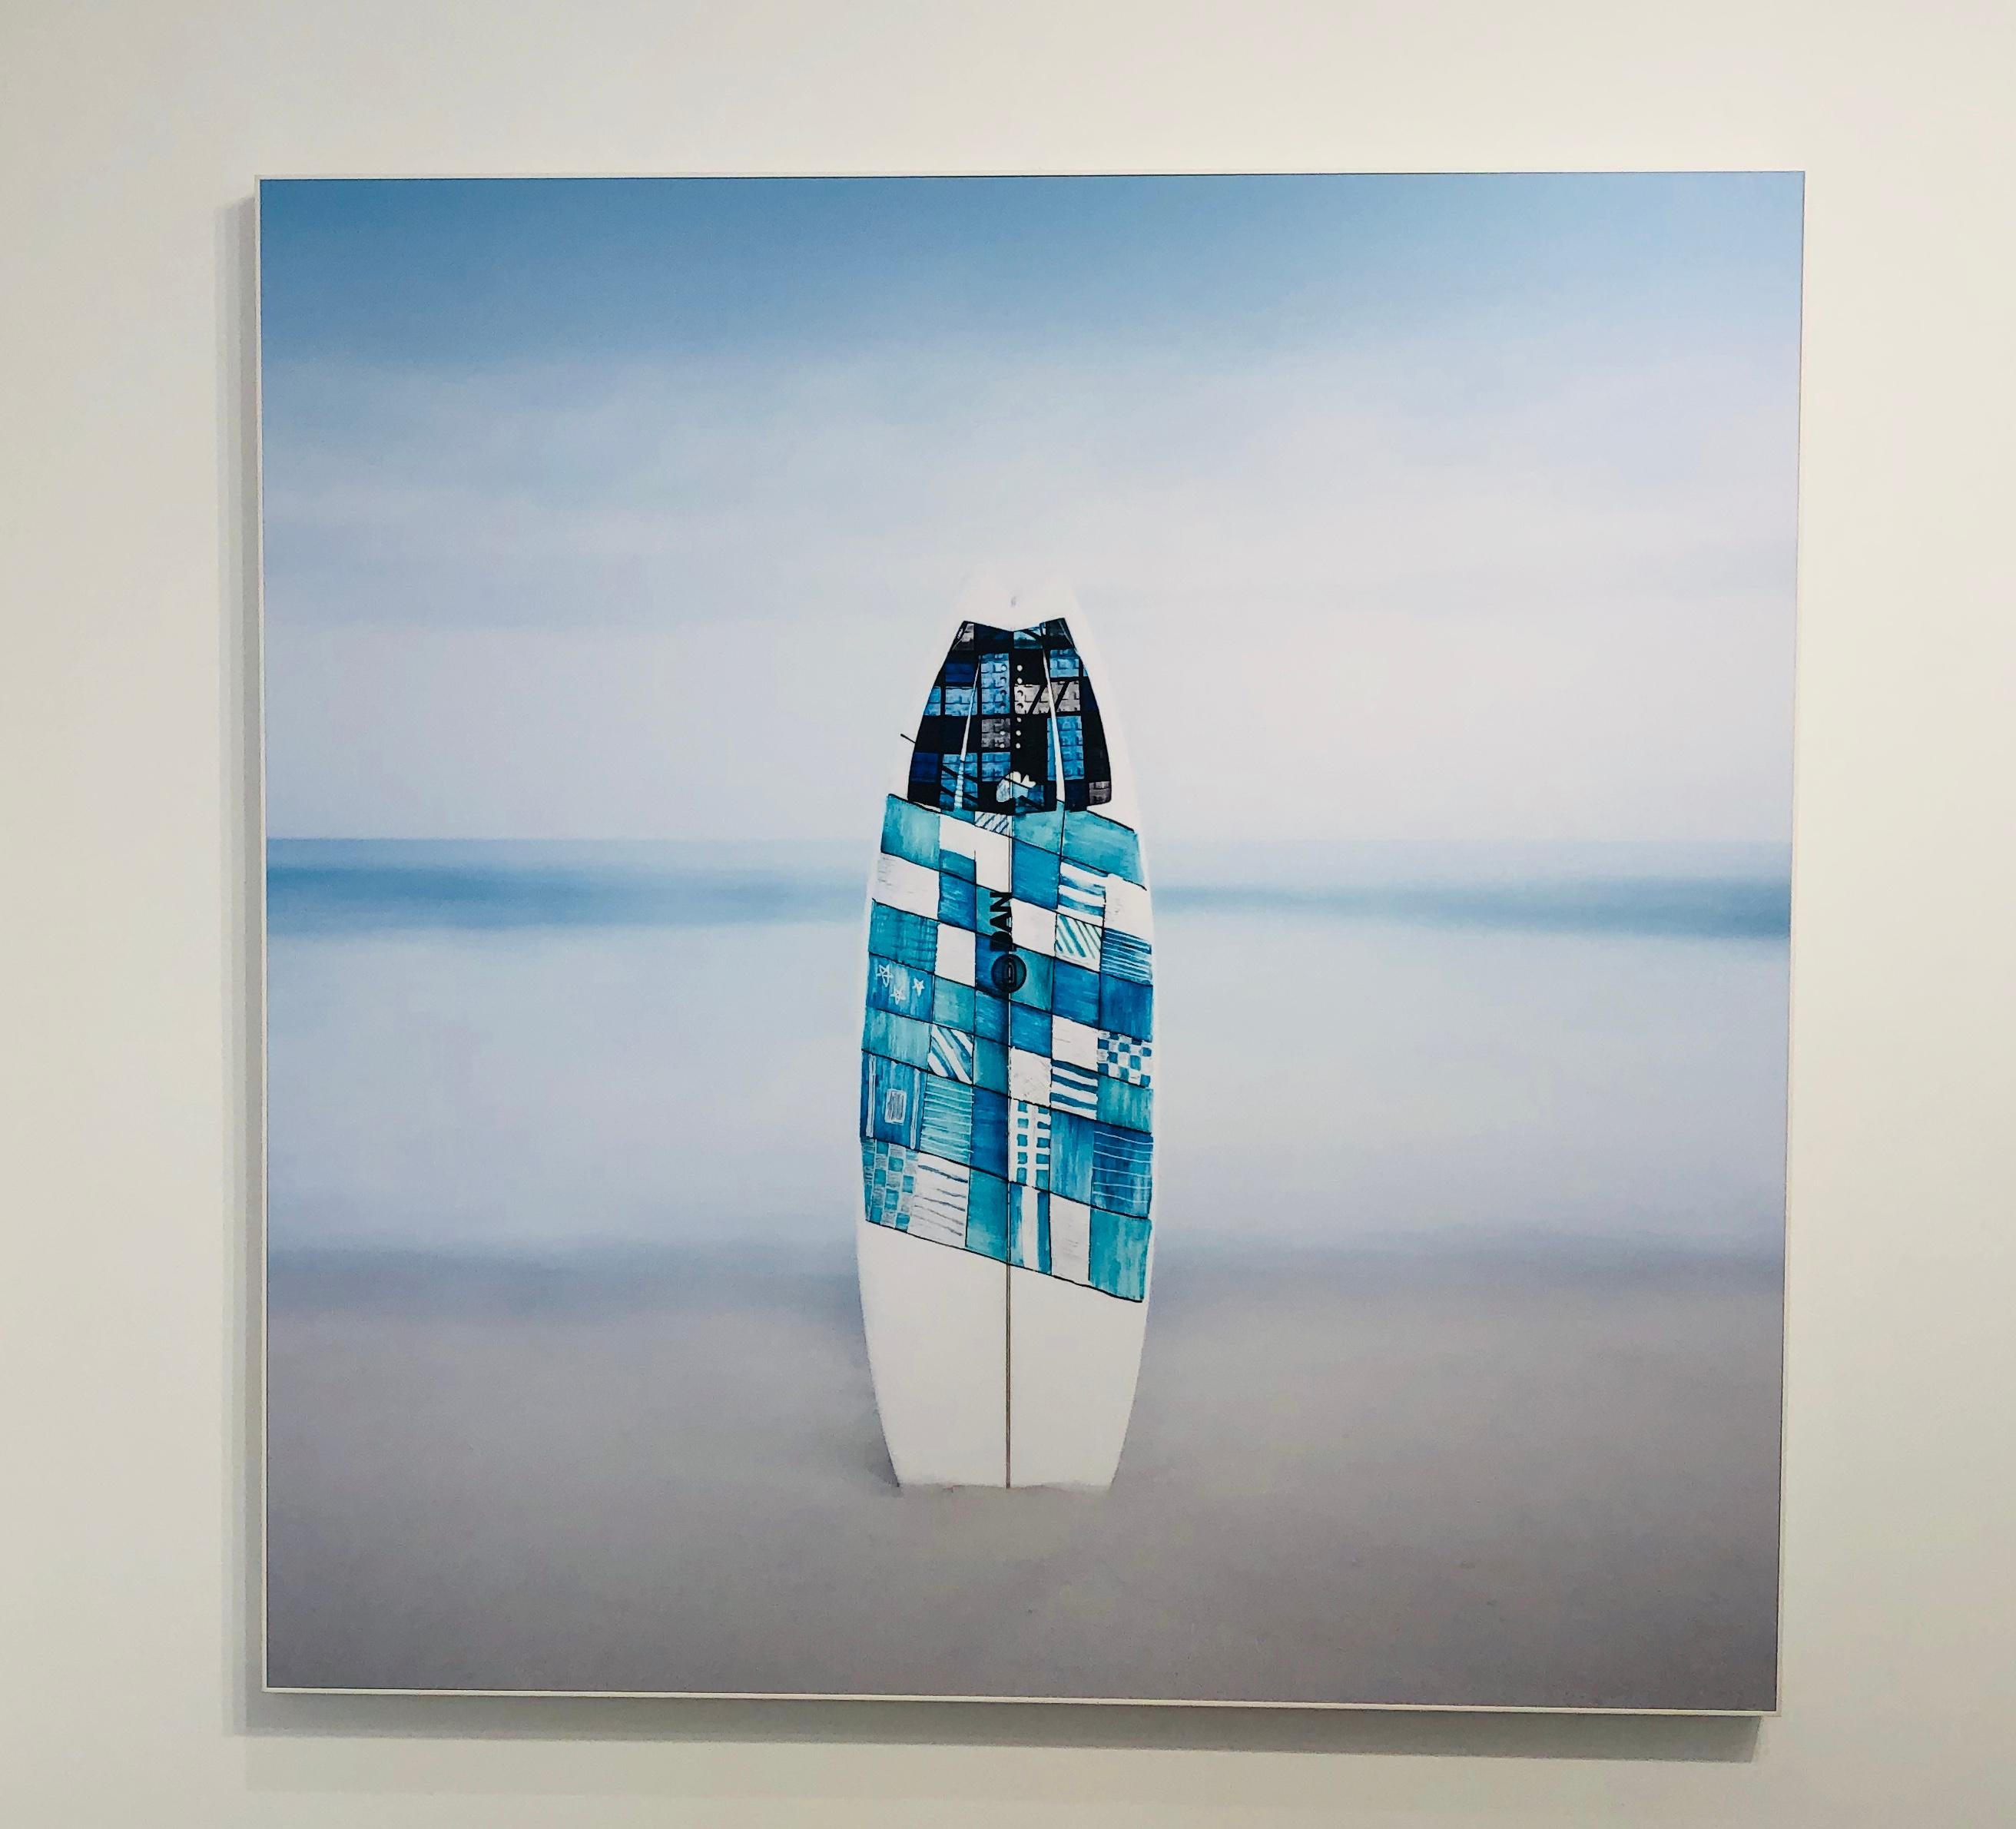 DT Surfboard at Napeague Lane - Framed - Ltd Ed of 10 - Photograph by Keith Ramsdell